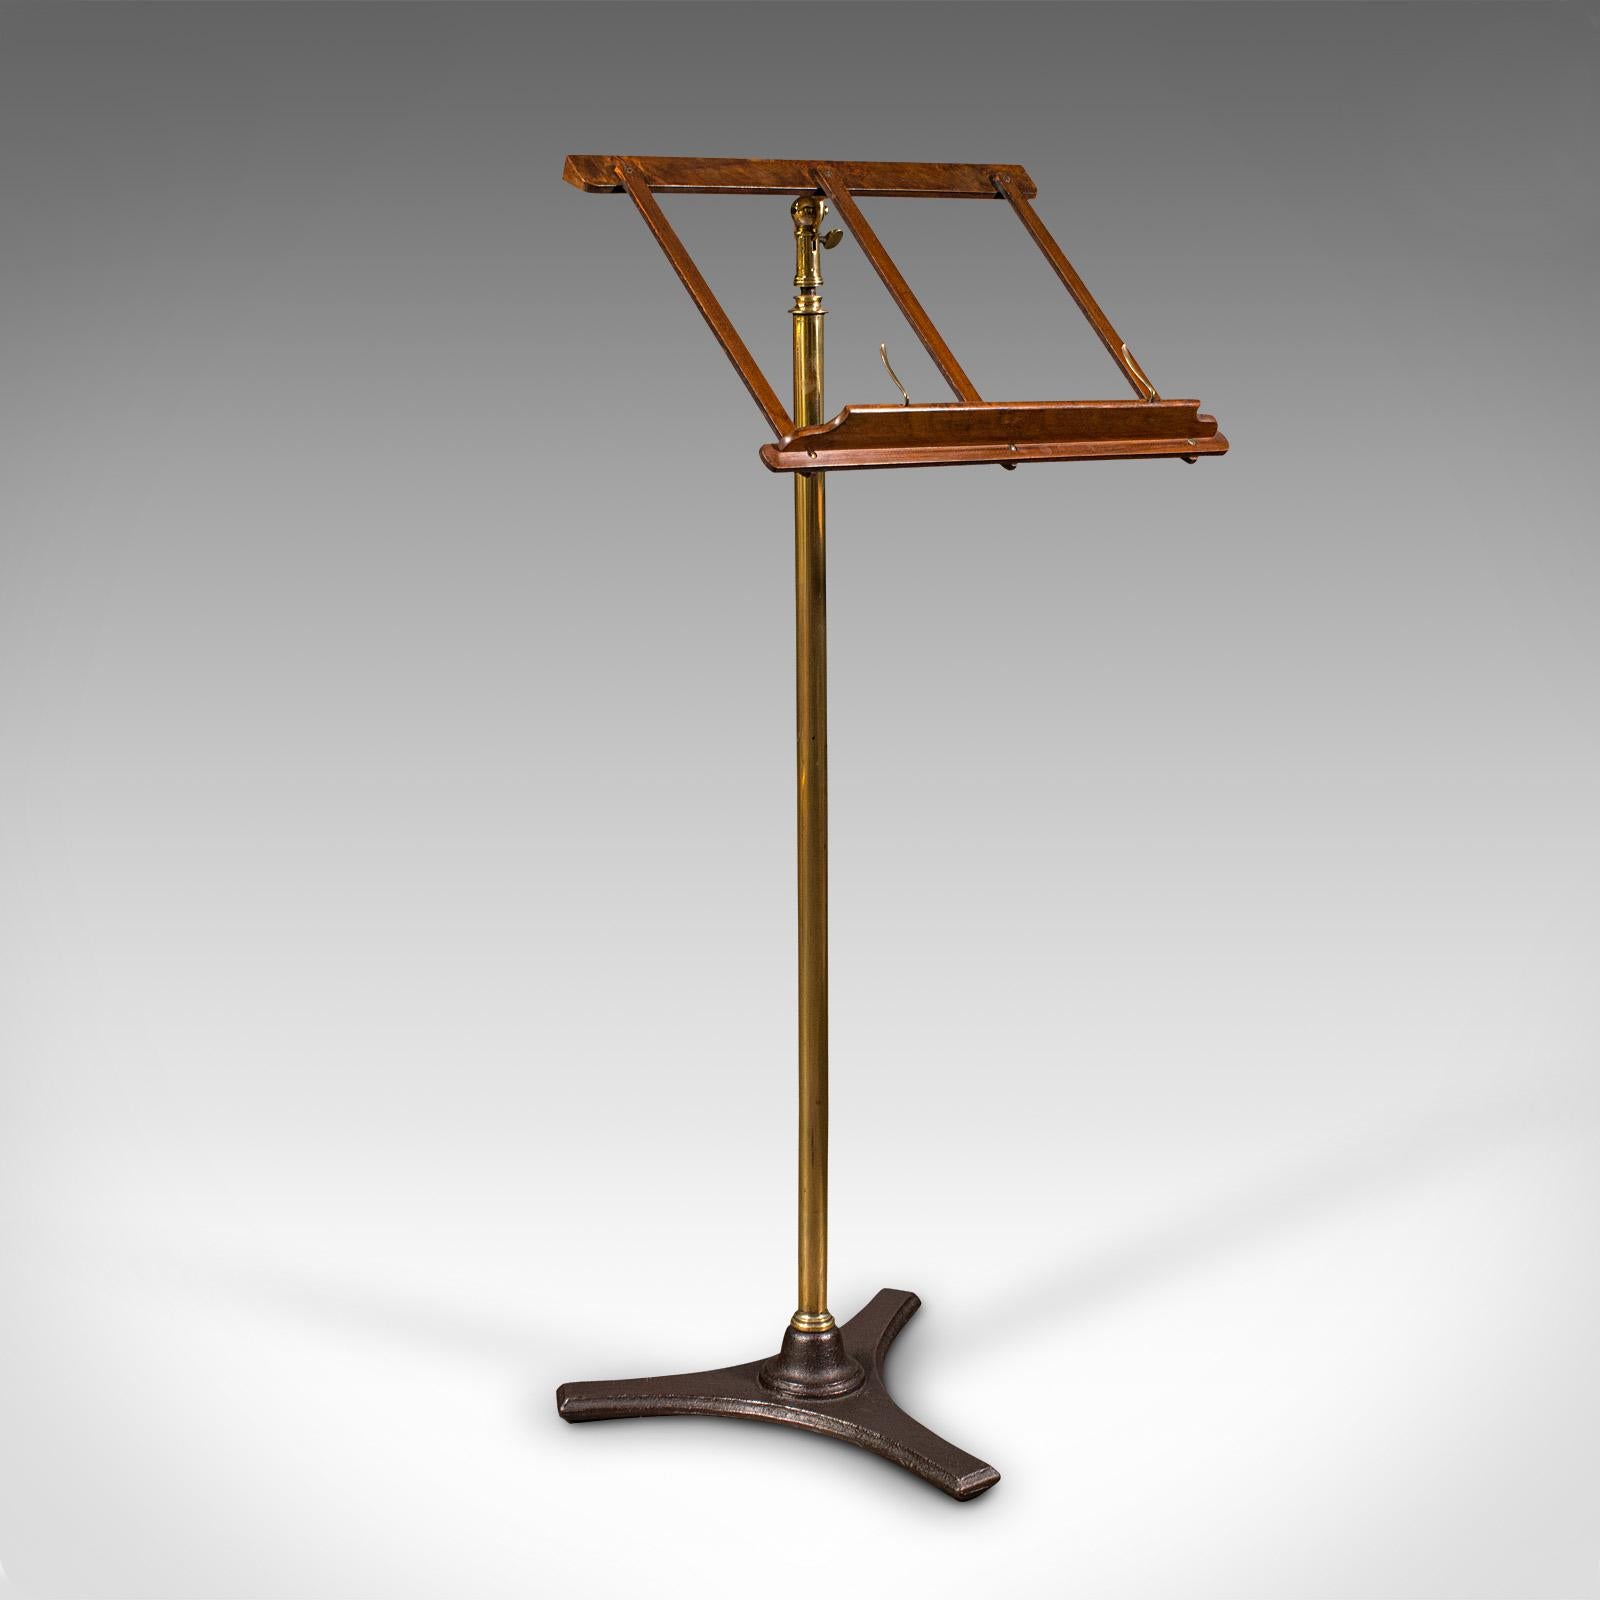 This is an antique music stand. An English, walnut and brass adjustable recital or lectern rest, dating to the Victorian period, circa 1870.

Host your sheet music or speeches from this elegant, adjustable rest
Displays a desirable aged patina